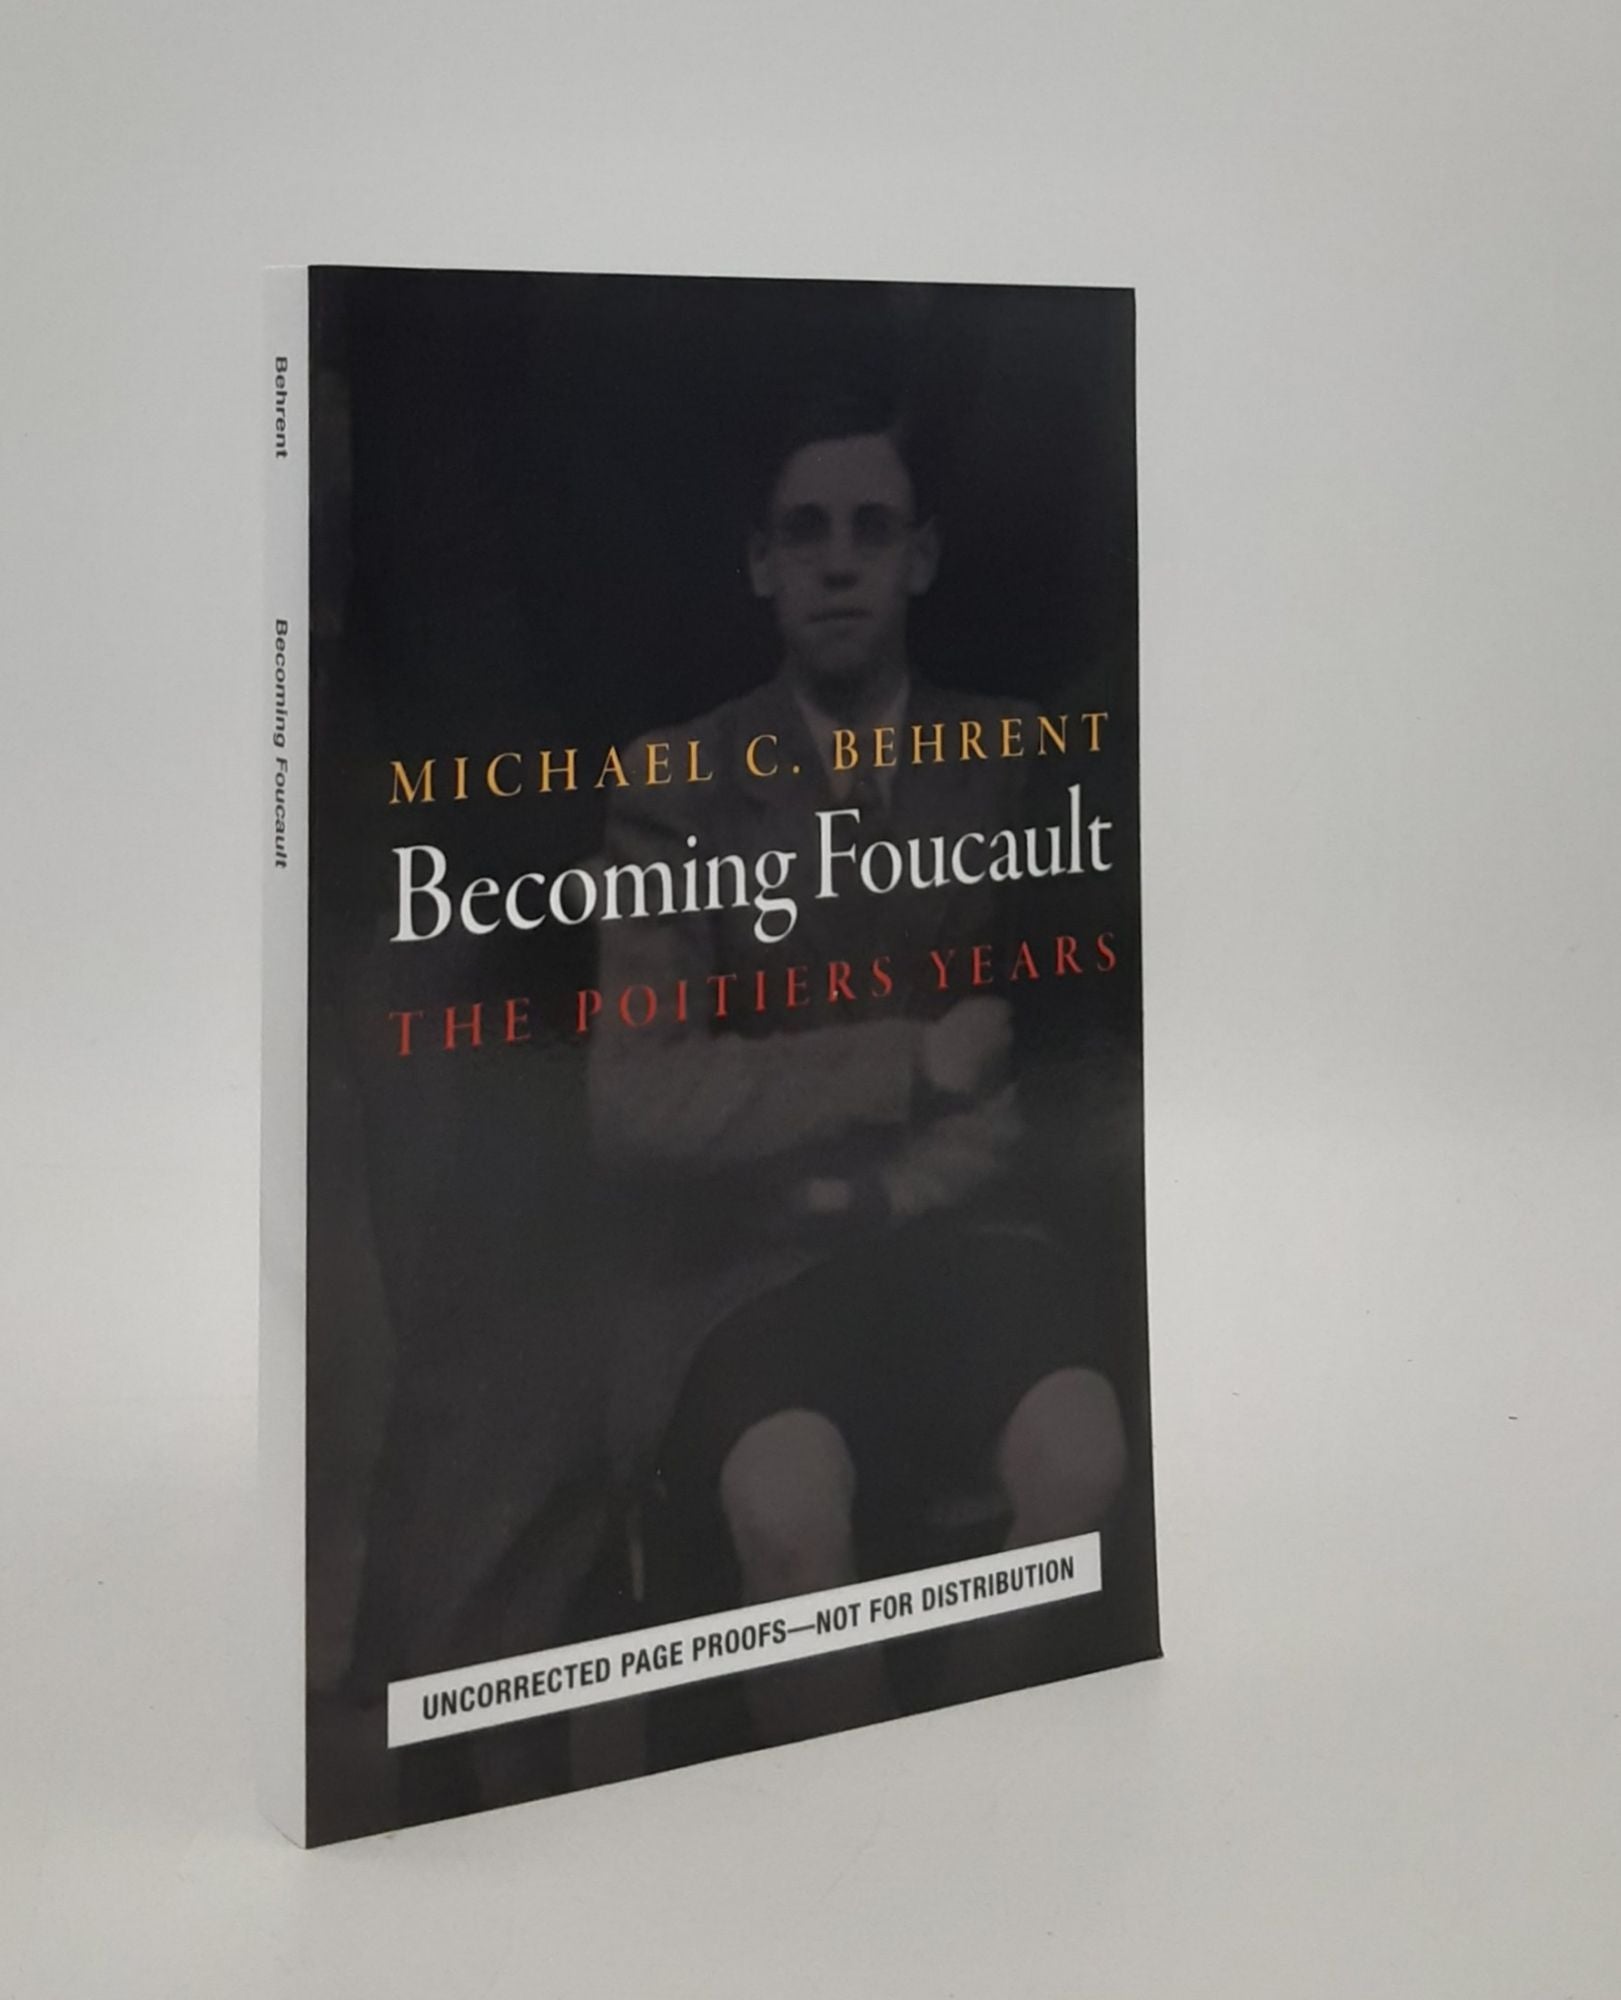 BEHRENT Michael C. - Becoming Foucault the Poitiers Years